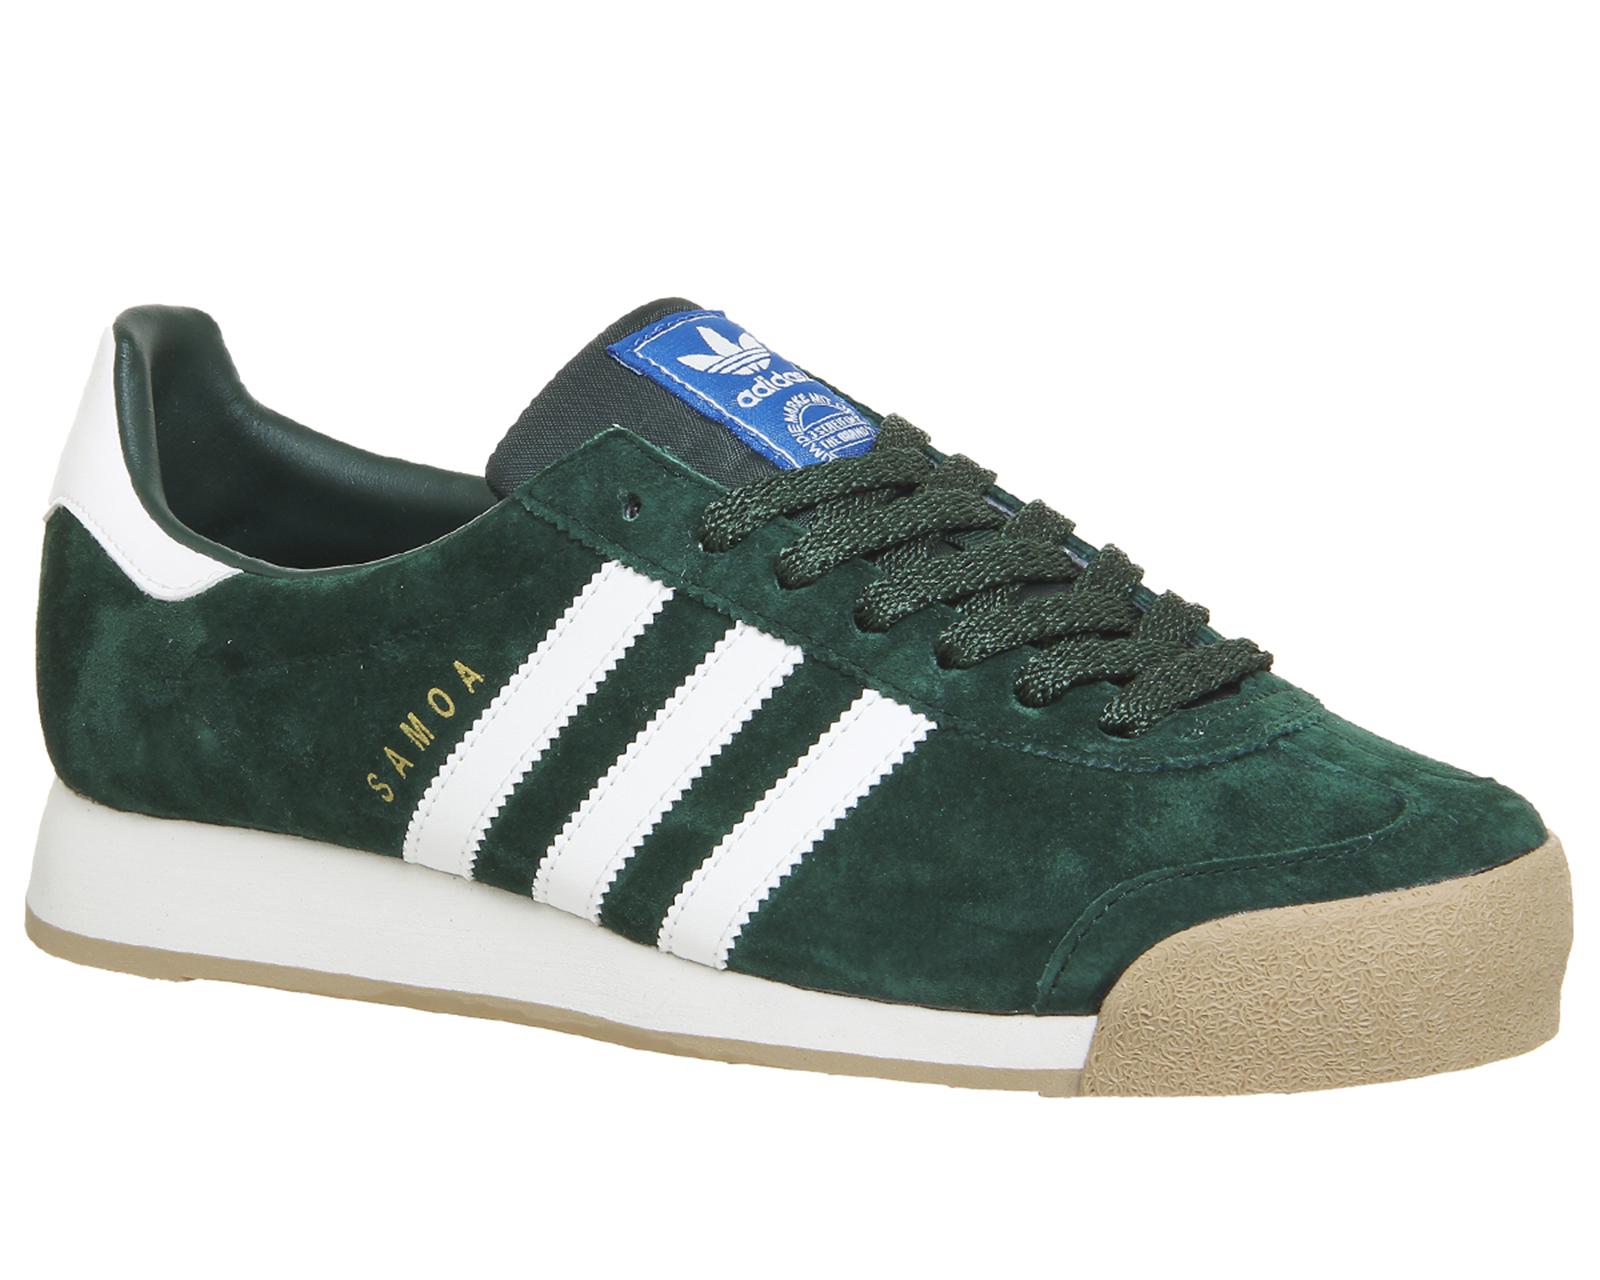 adidas Suede Samoa Vintage in Green for Men - Lyst